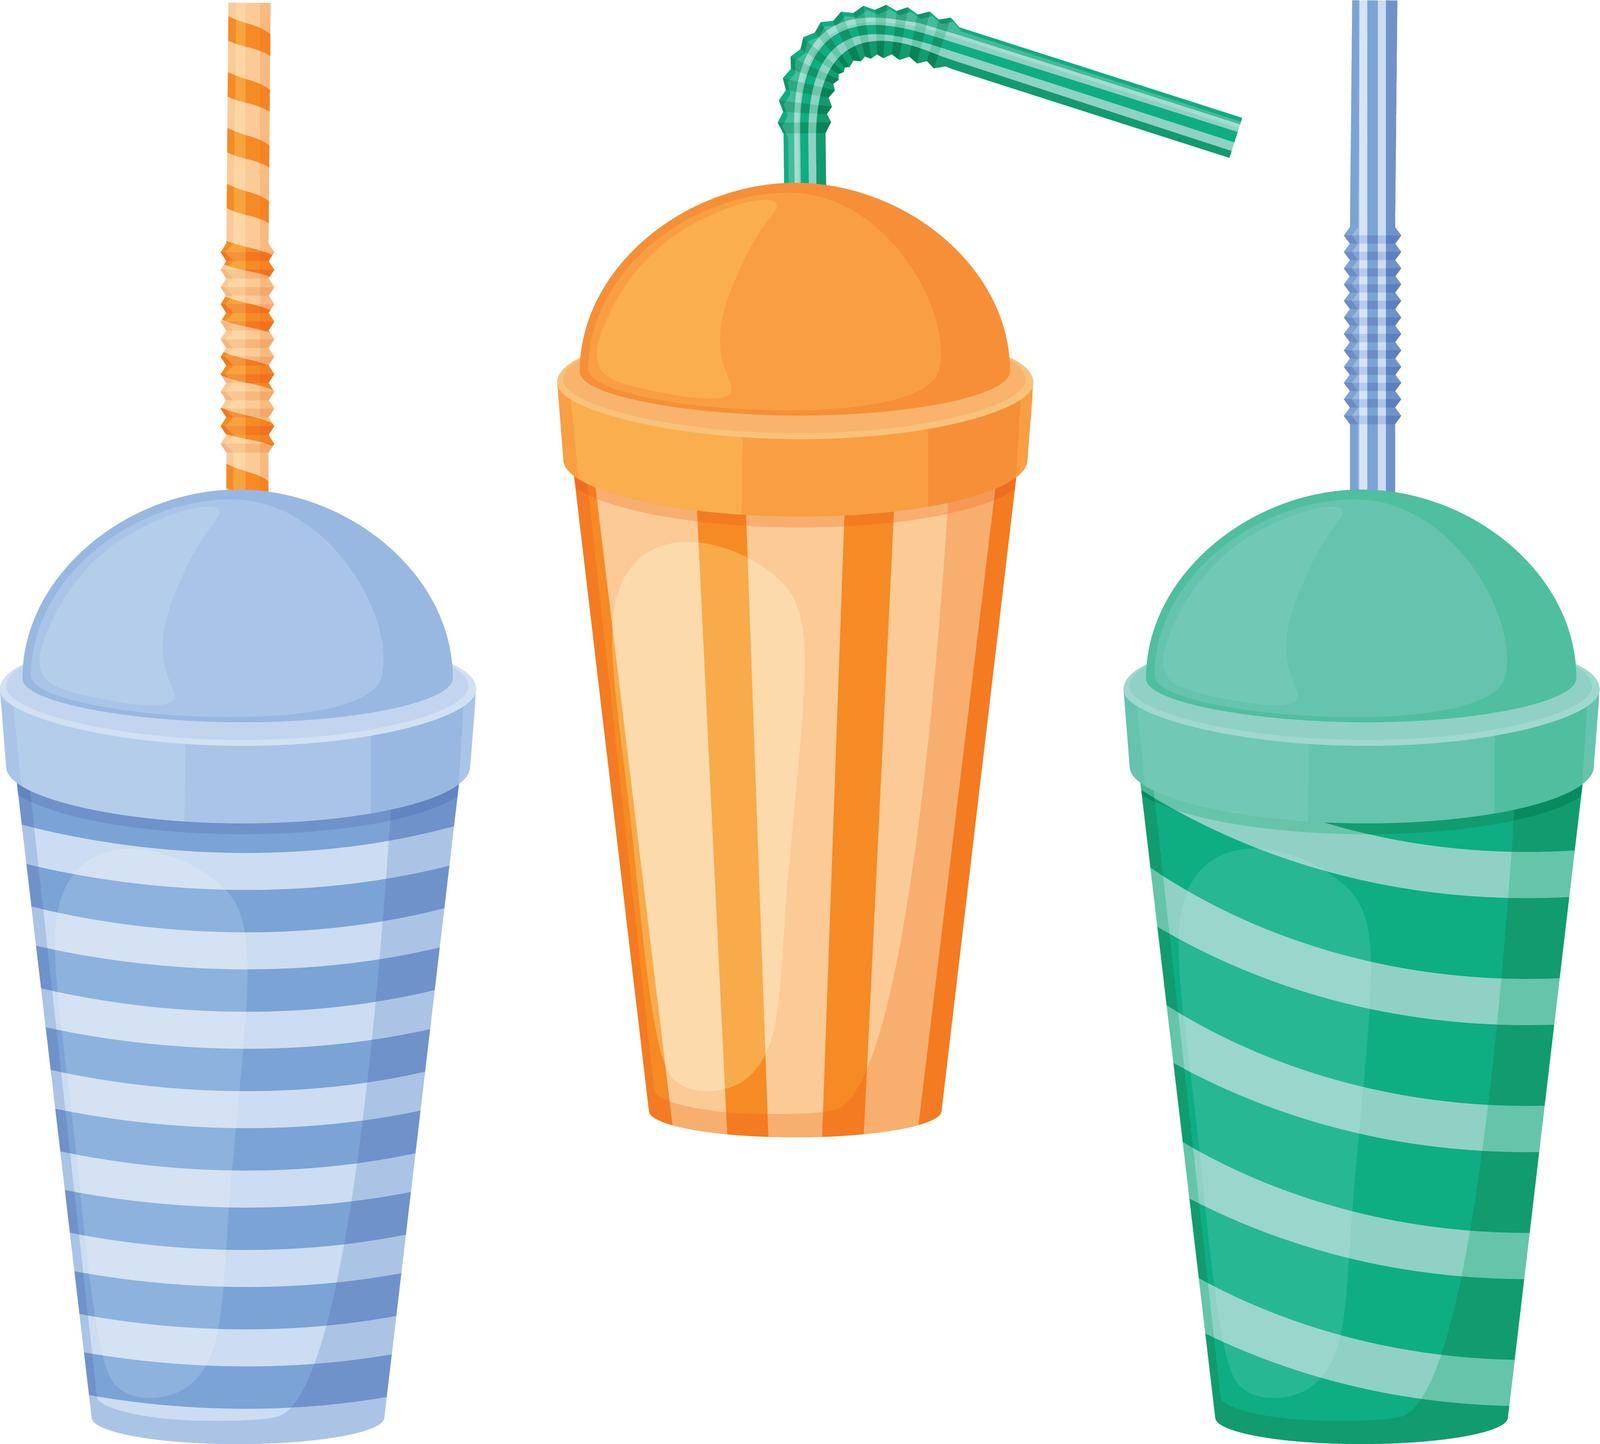 A paper cup. A set of paper cups with a straw. Plastic cups for fast food. A cup for drinks of different colors with a straw. Vector illustration isolated on a white background.